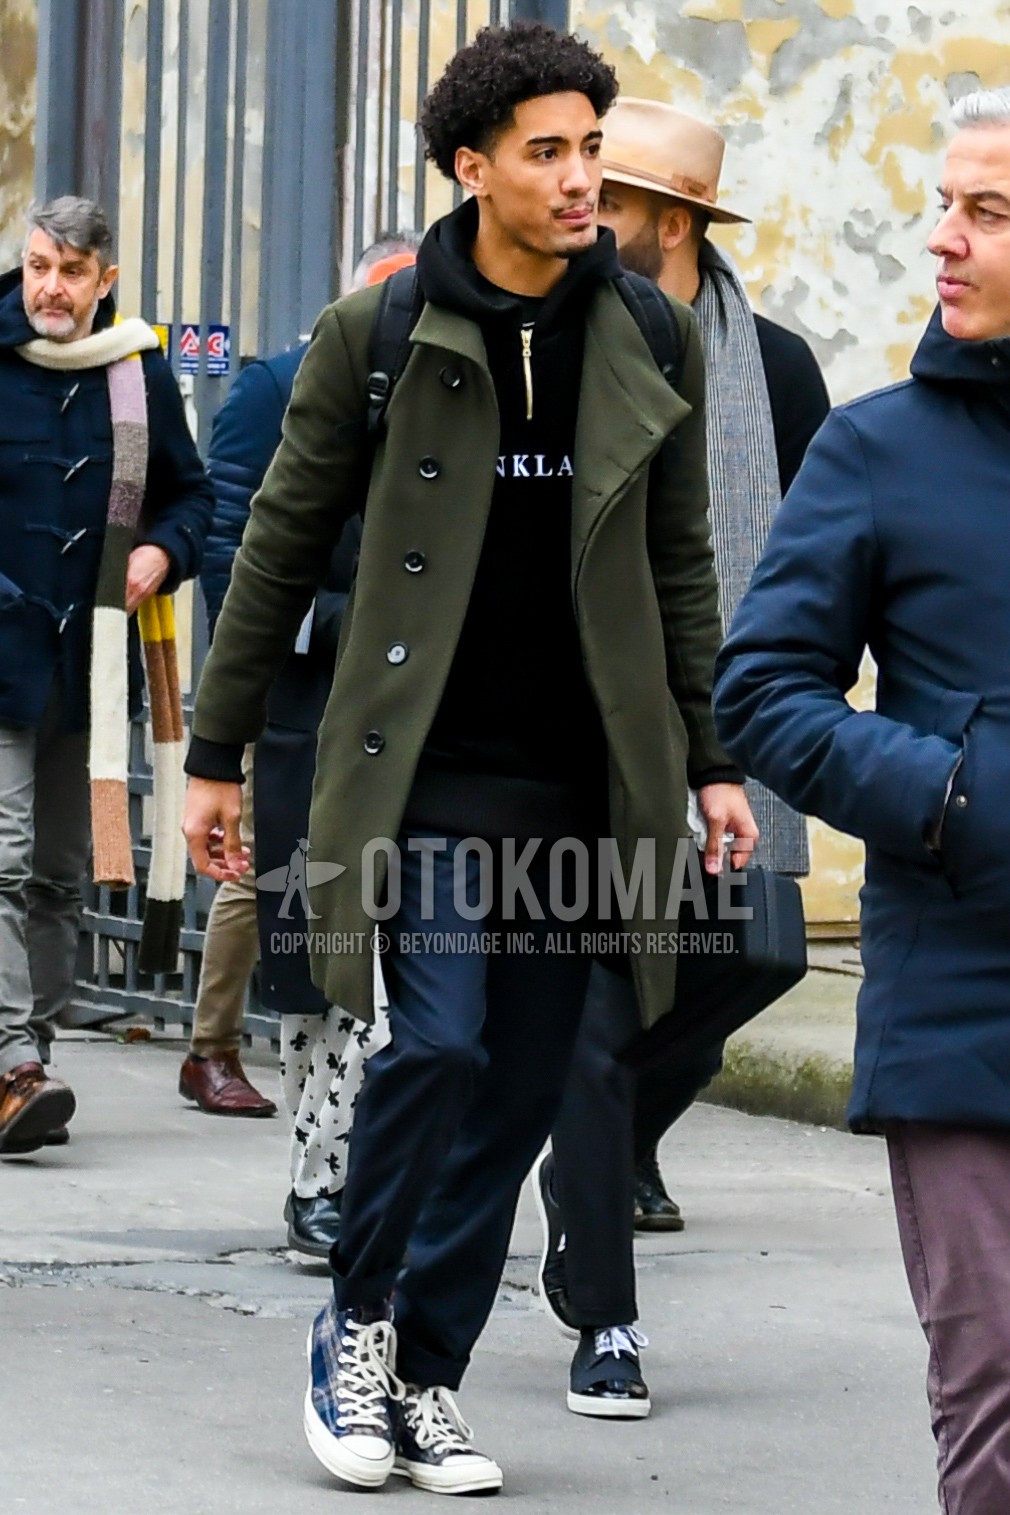 Men's autumn winter outfit with olive green plain stenkarrer coat, black graphic hoodie, navy plain slacks, navy high-cut sneakers.